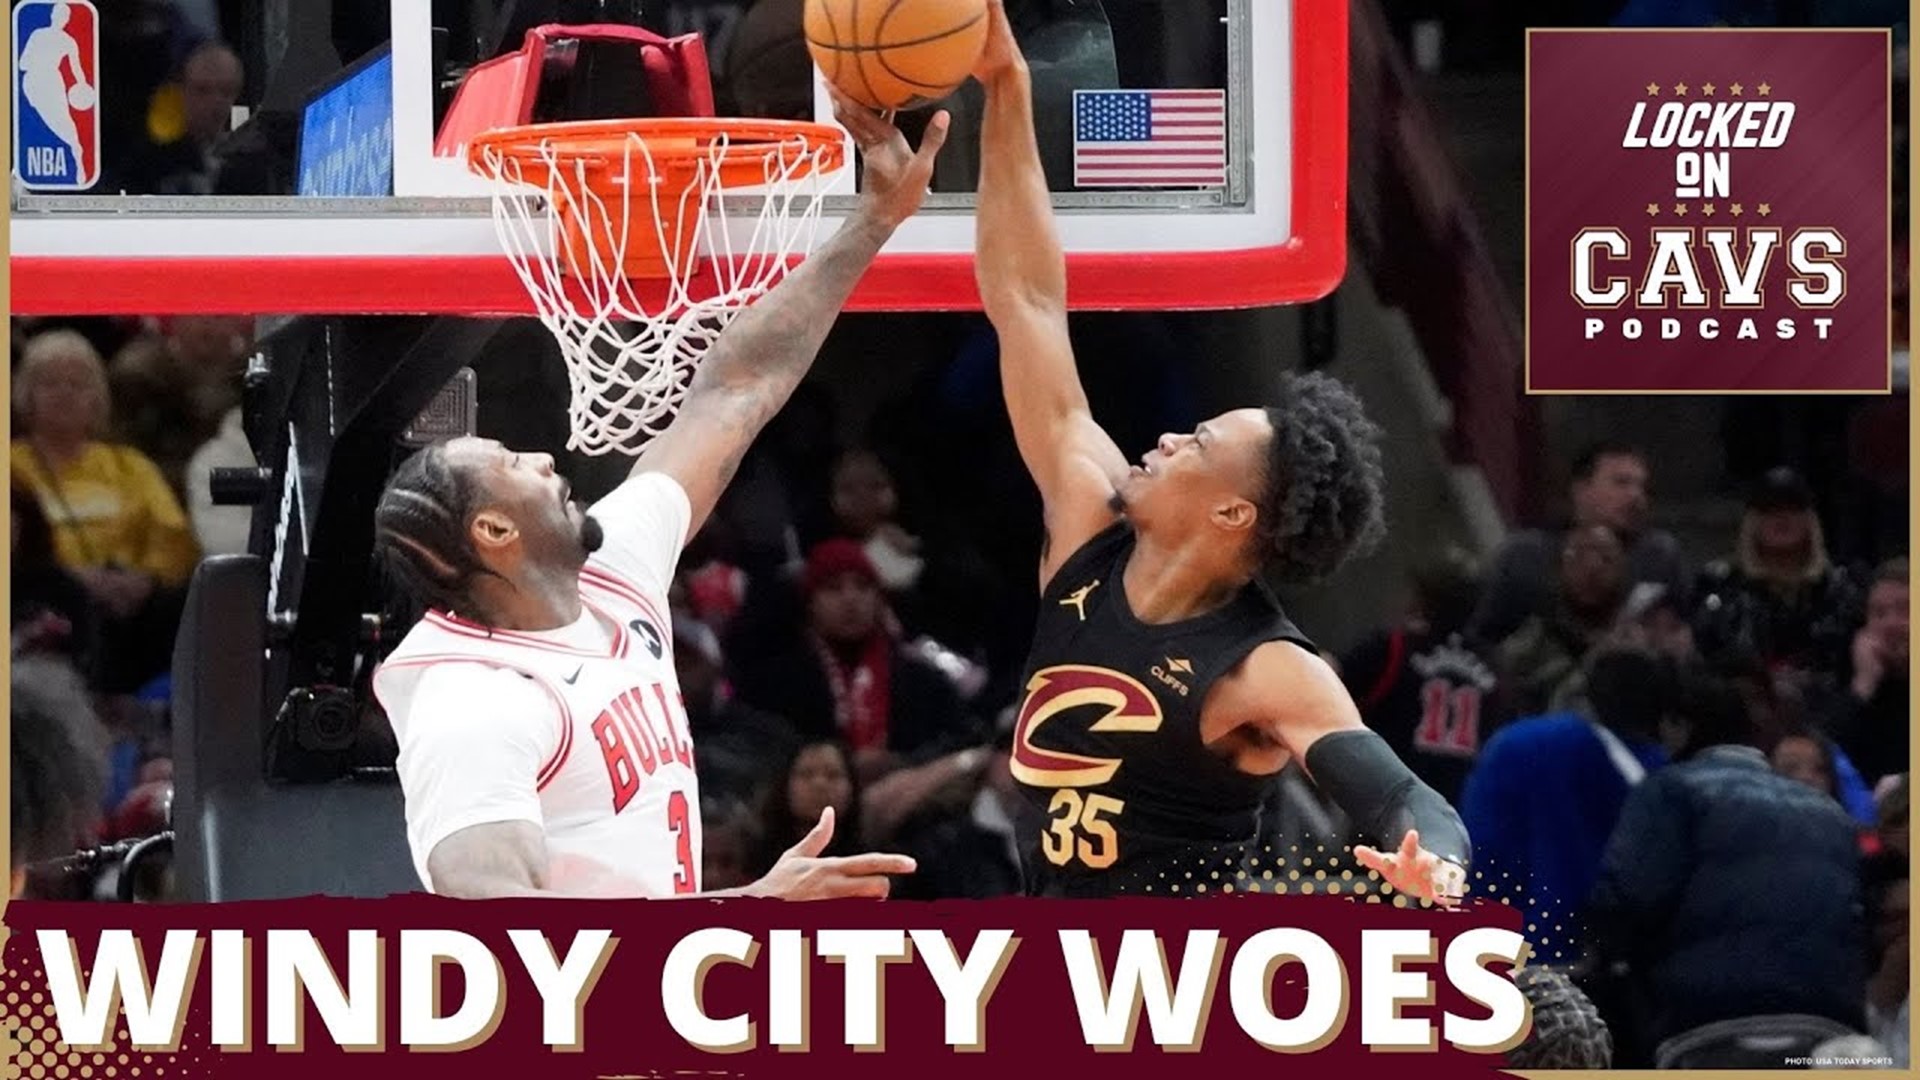 the Cavs’ double overtime loss to the Bulls, why rebounding cost the team a win, Evan Mobley’s positive night,